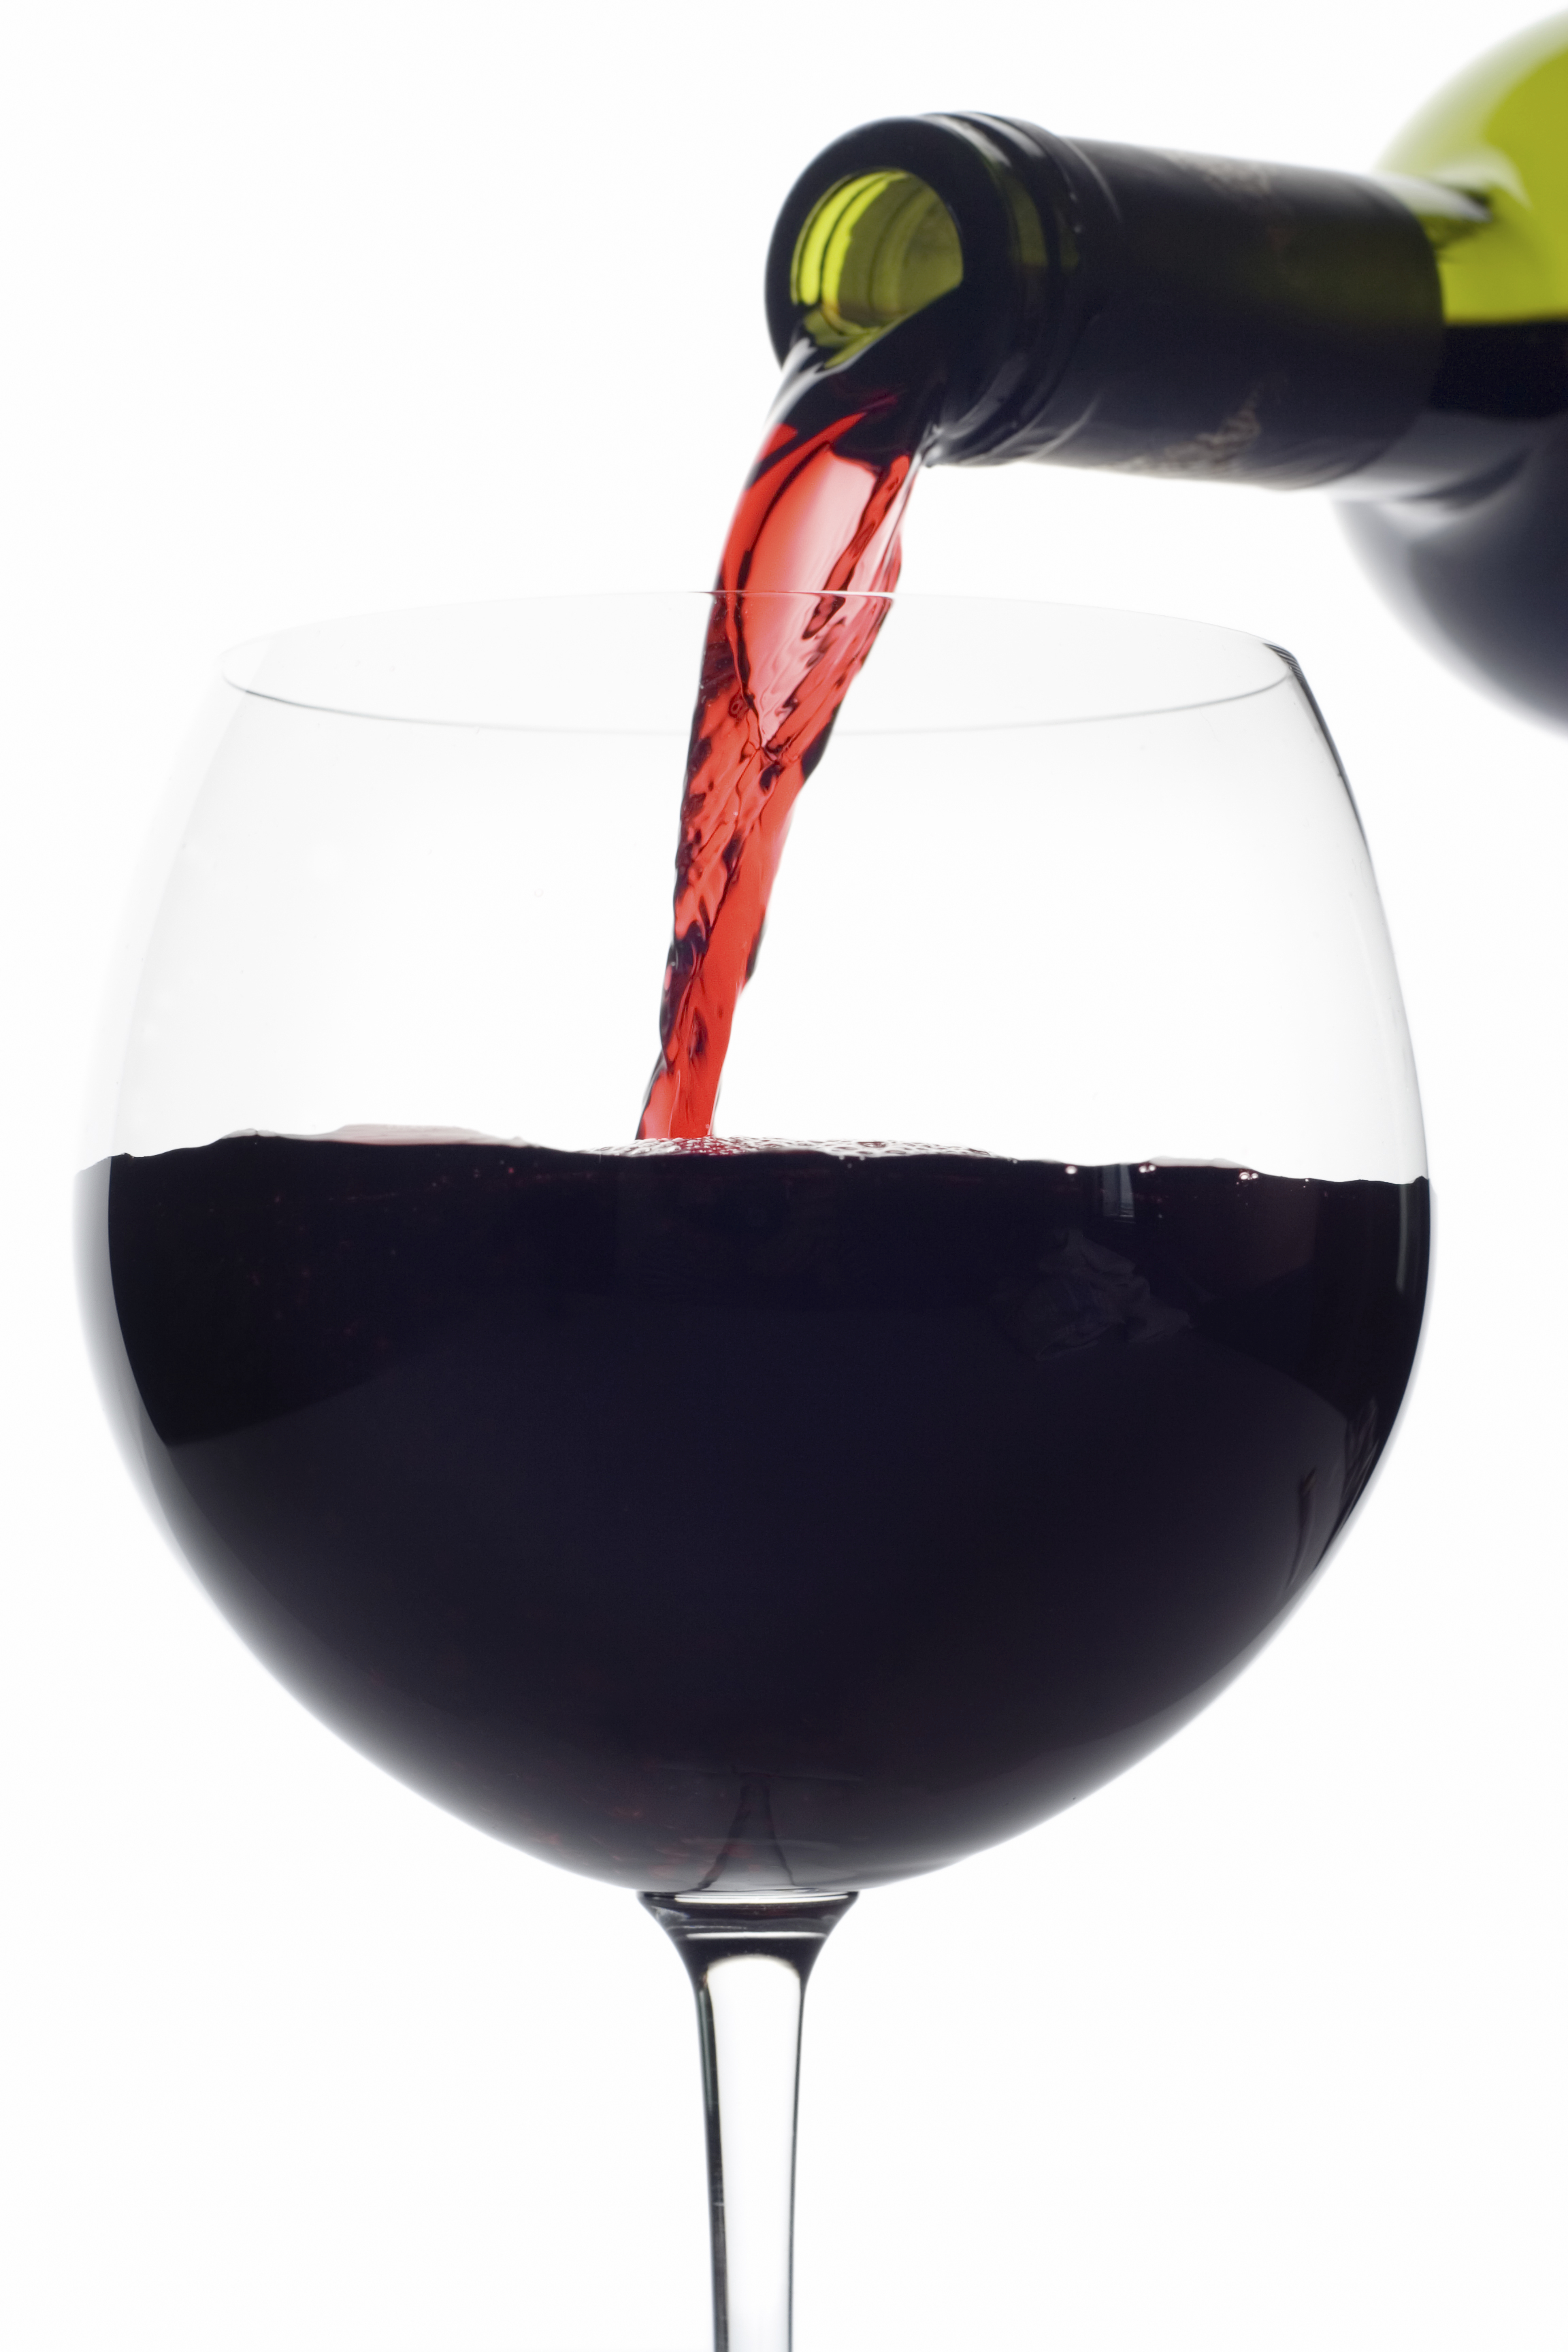 Red Wine Pouring Down From A Wine Bottle  Clipping Path Included